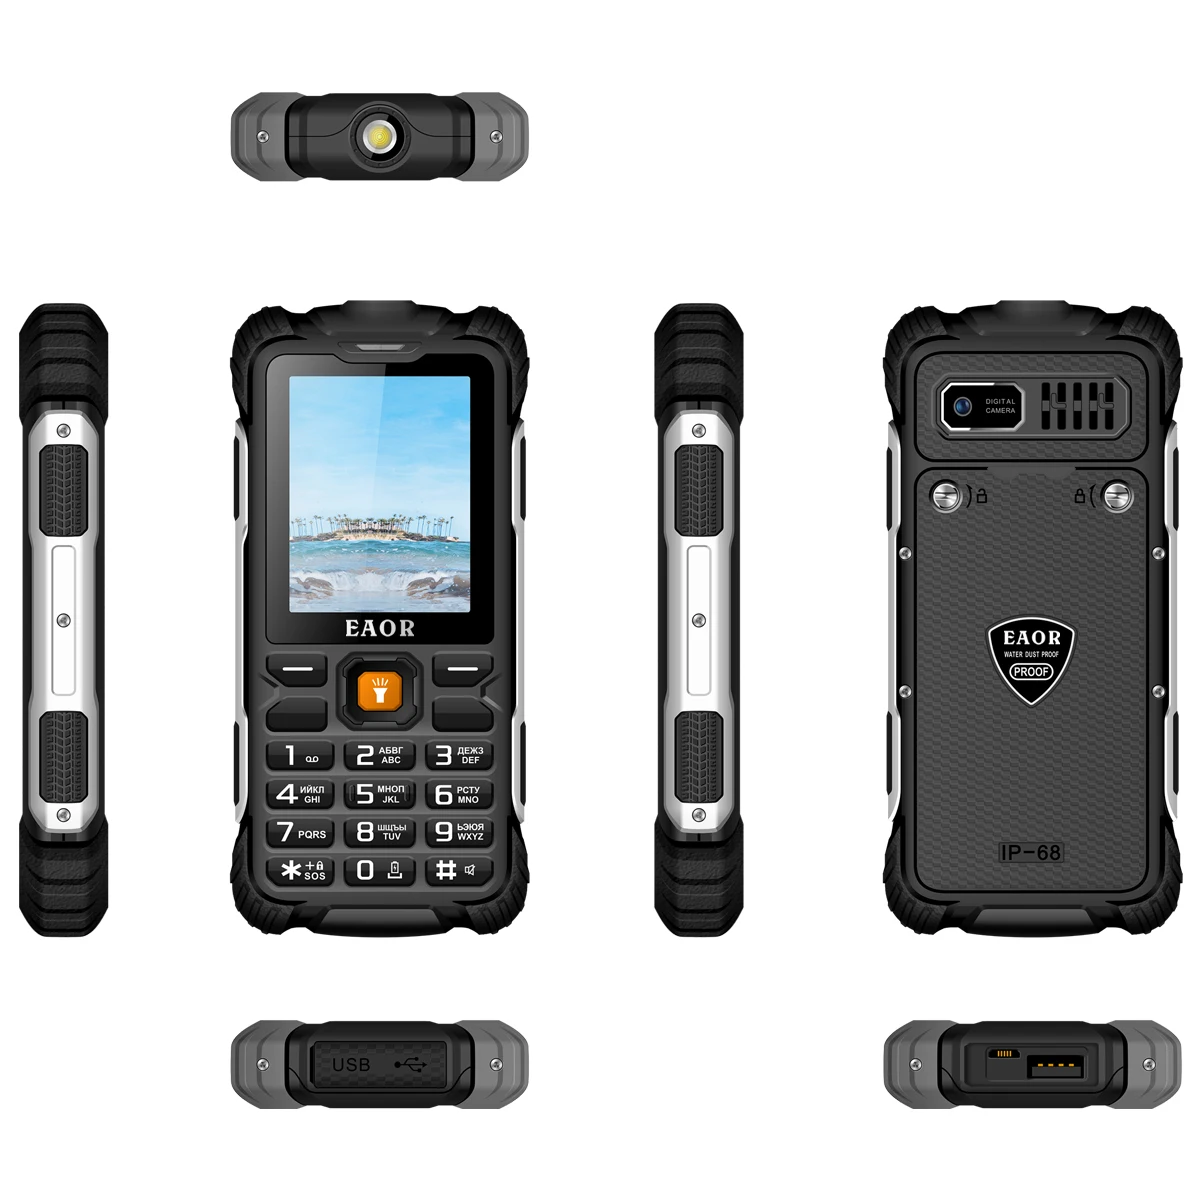 EAOR 2G Rugged Phone 3000mAh Support Reverse Charging IP68 Water/Dust-proof Push-button Telephone Keypad Phones Feature Phone hunting walkie talkies